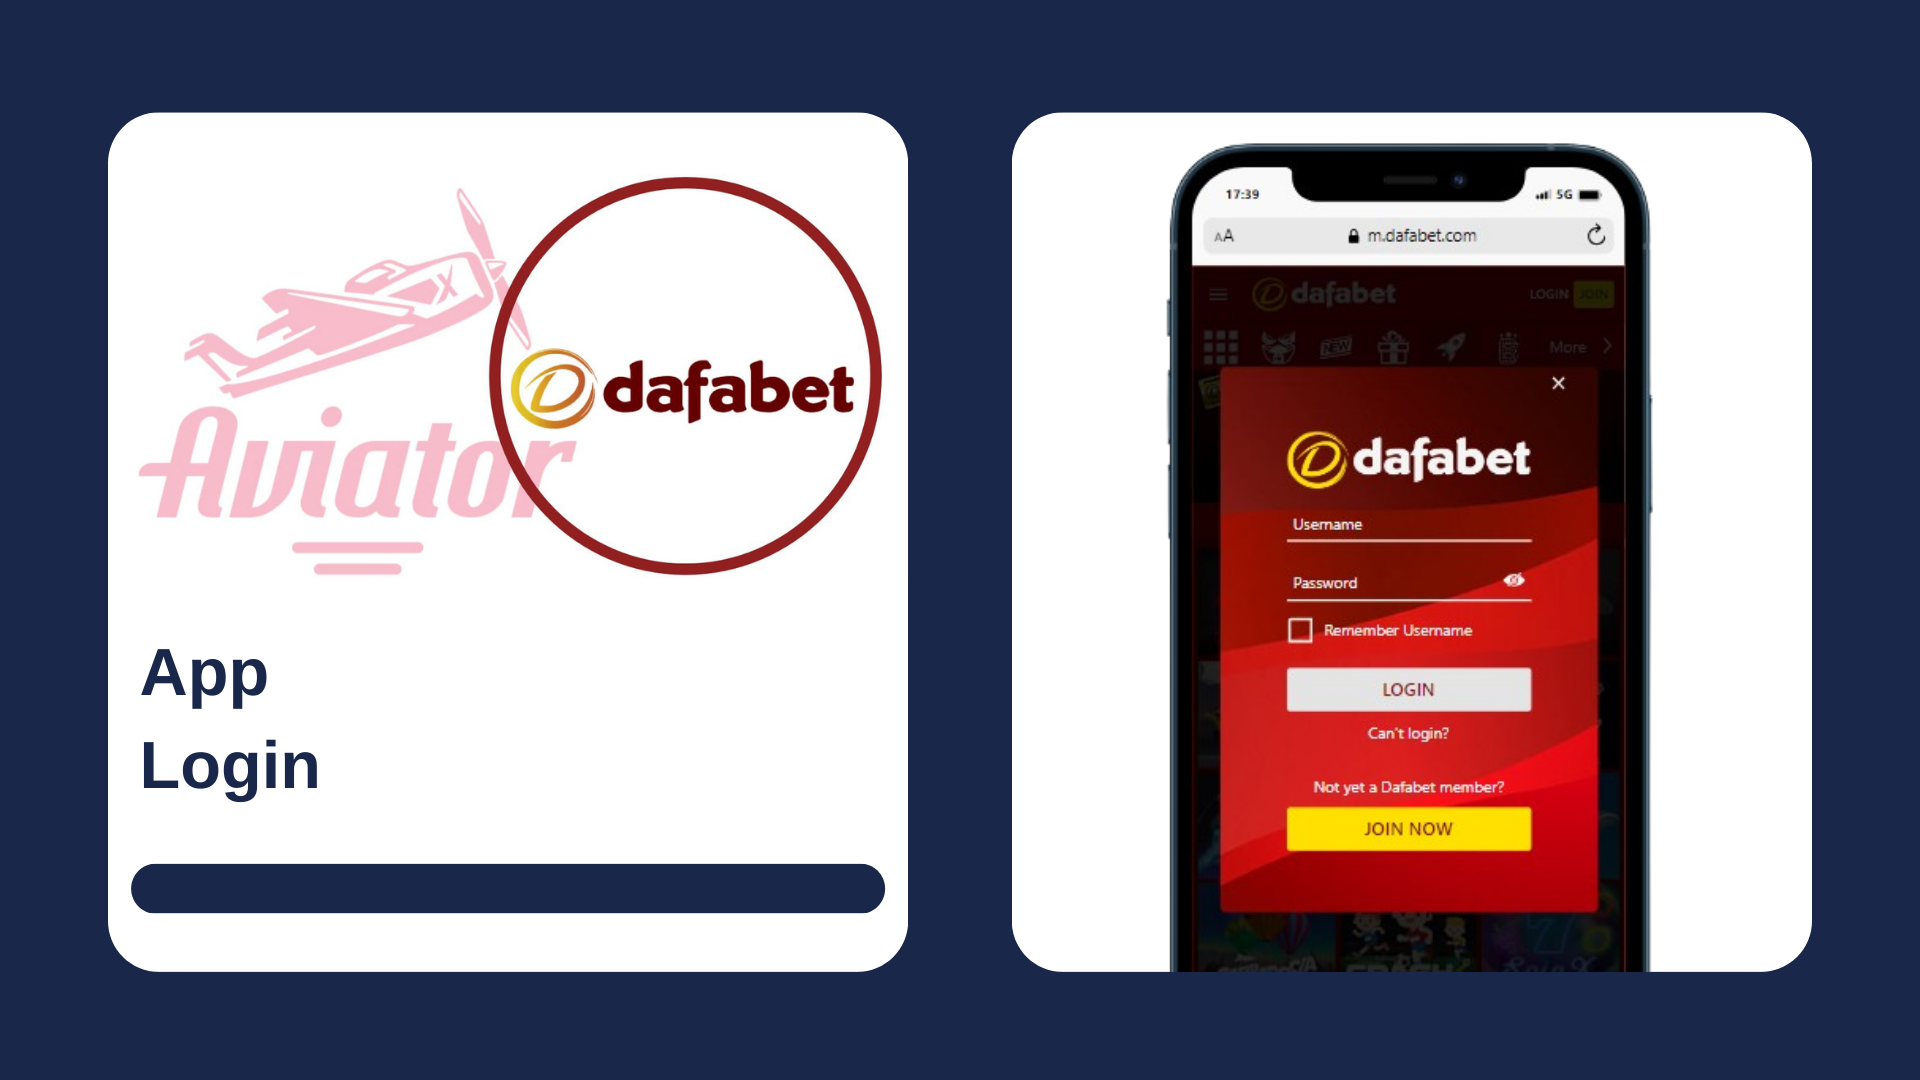 A smartphone showing sign in form of the casino, with Aviator game and Dafabet logos